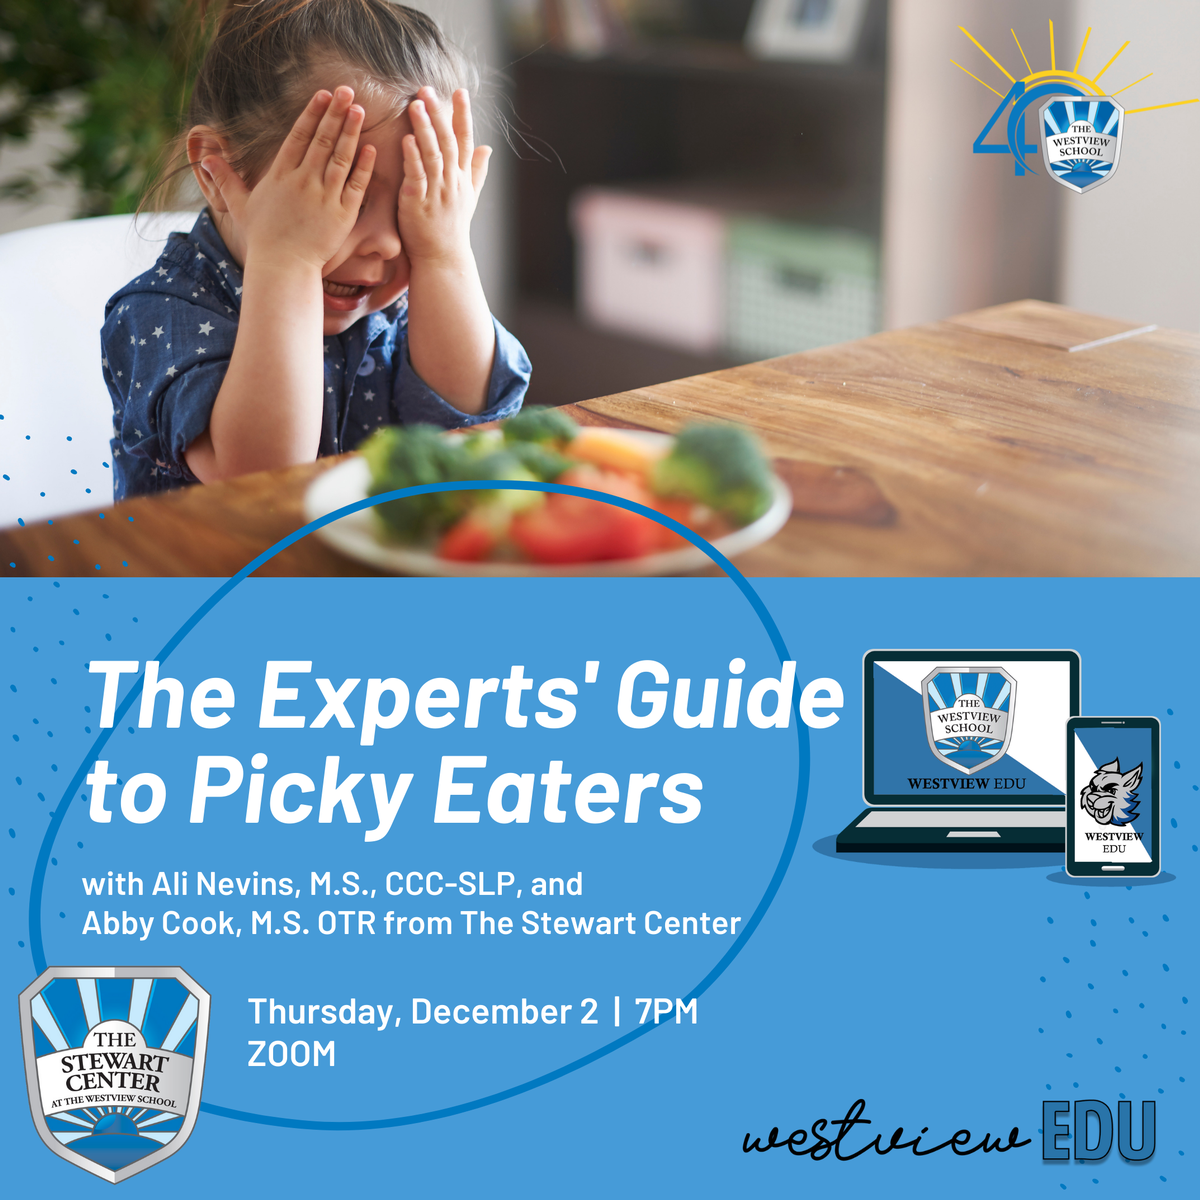 Westview EDU: The Experts' Guide to Picky Eaters